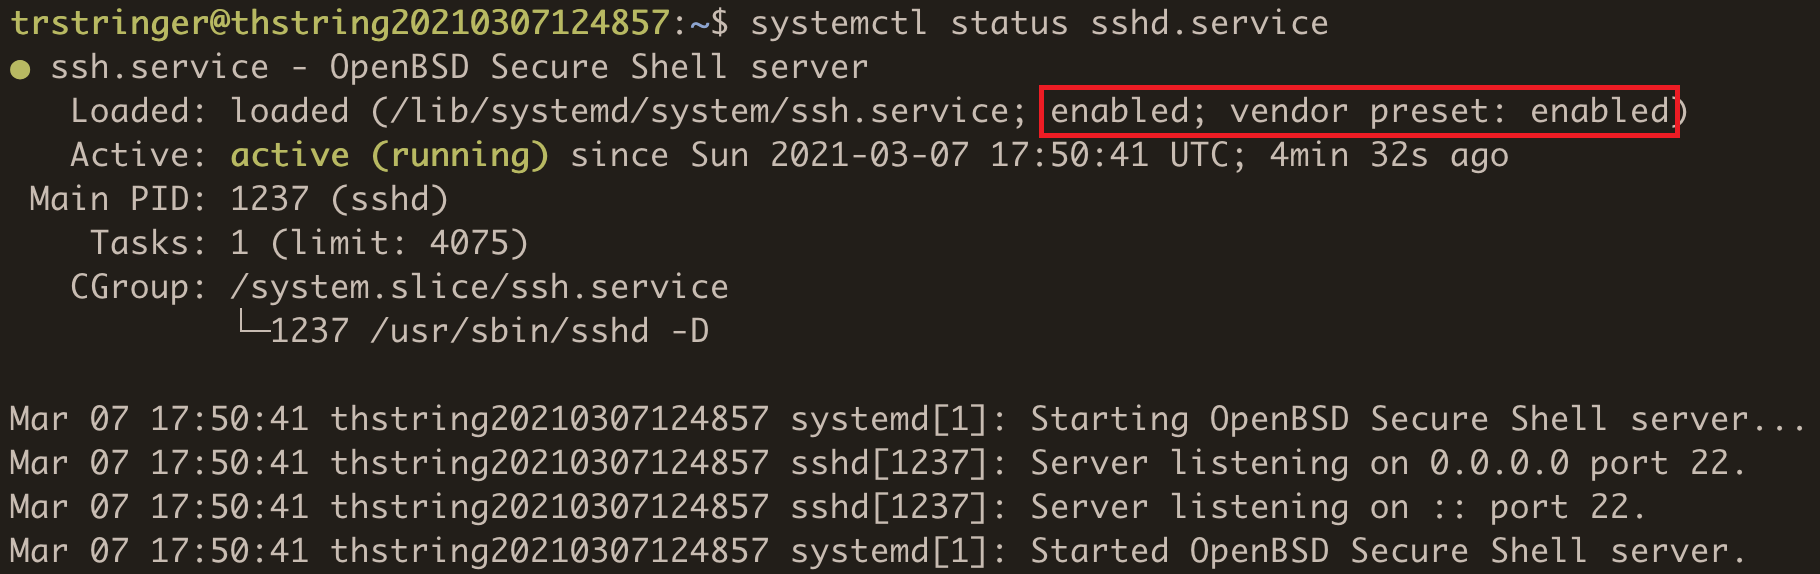 ssh.service status enabled